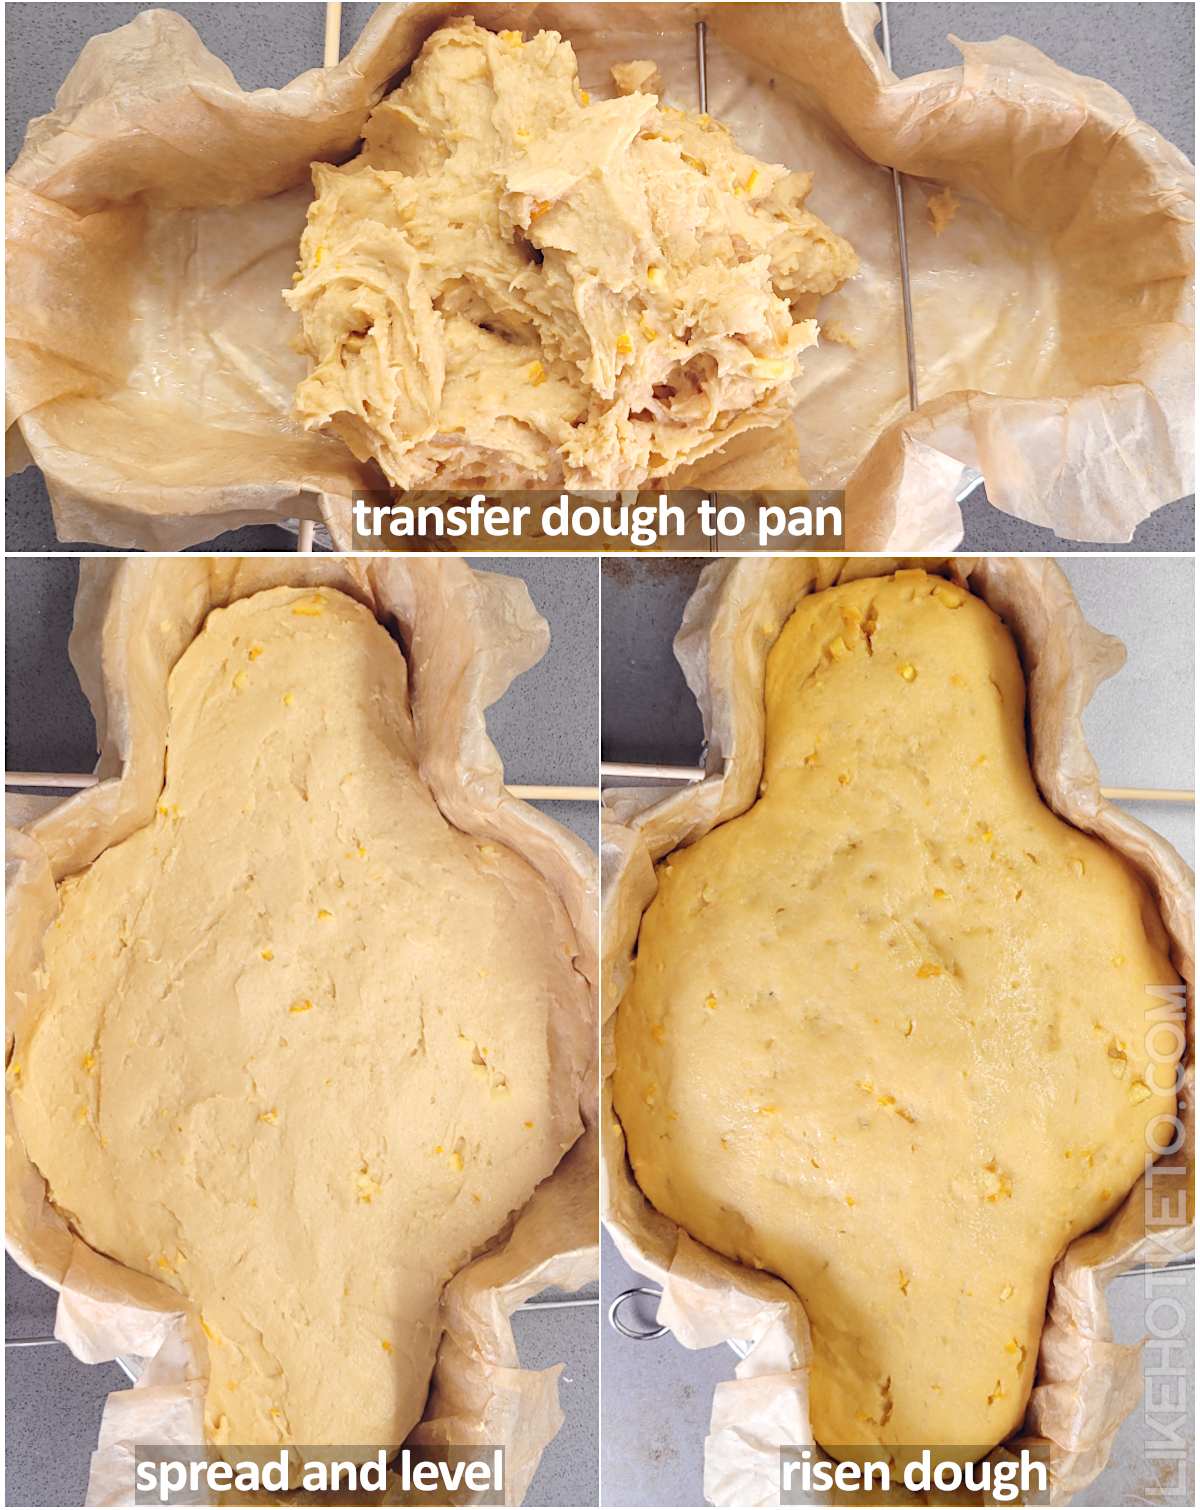 Keto colomba dough in the dove pan with oiled parchment paper, then spread and level, and fully risen.